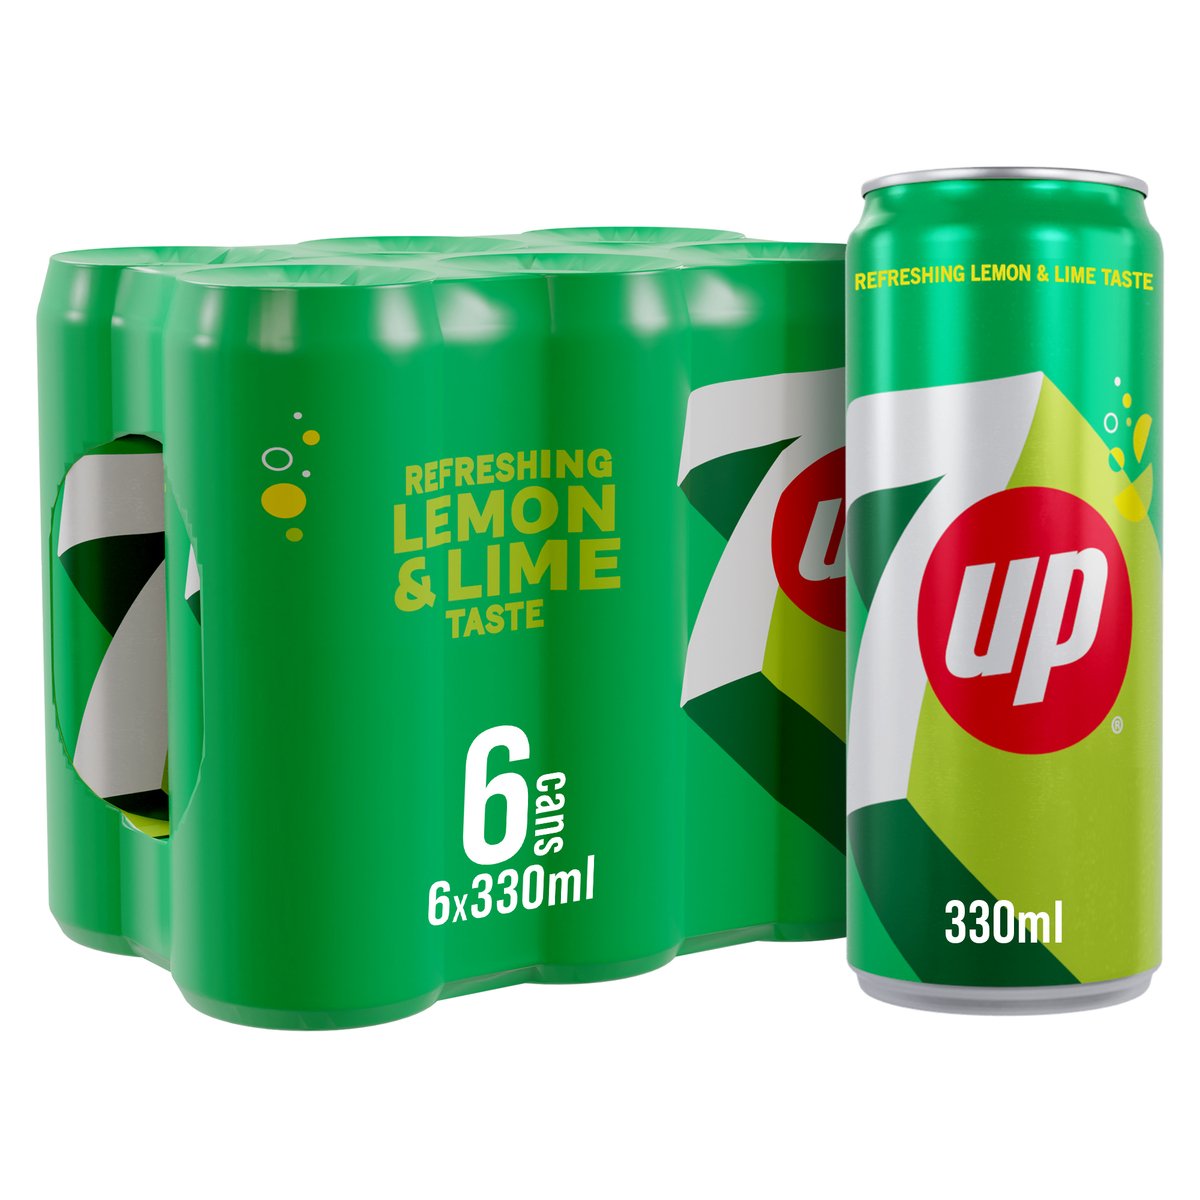 7UP Carbonated Soft Drink Cans 330 ml